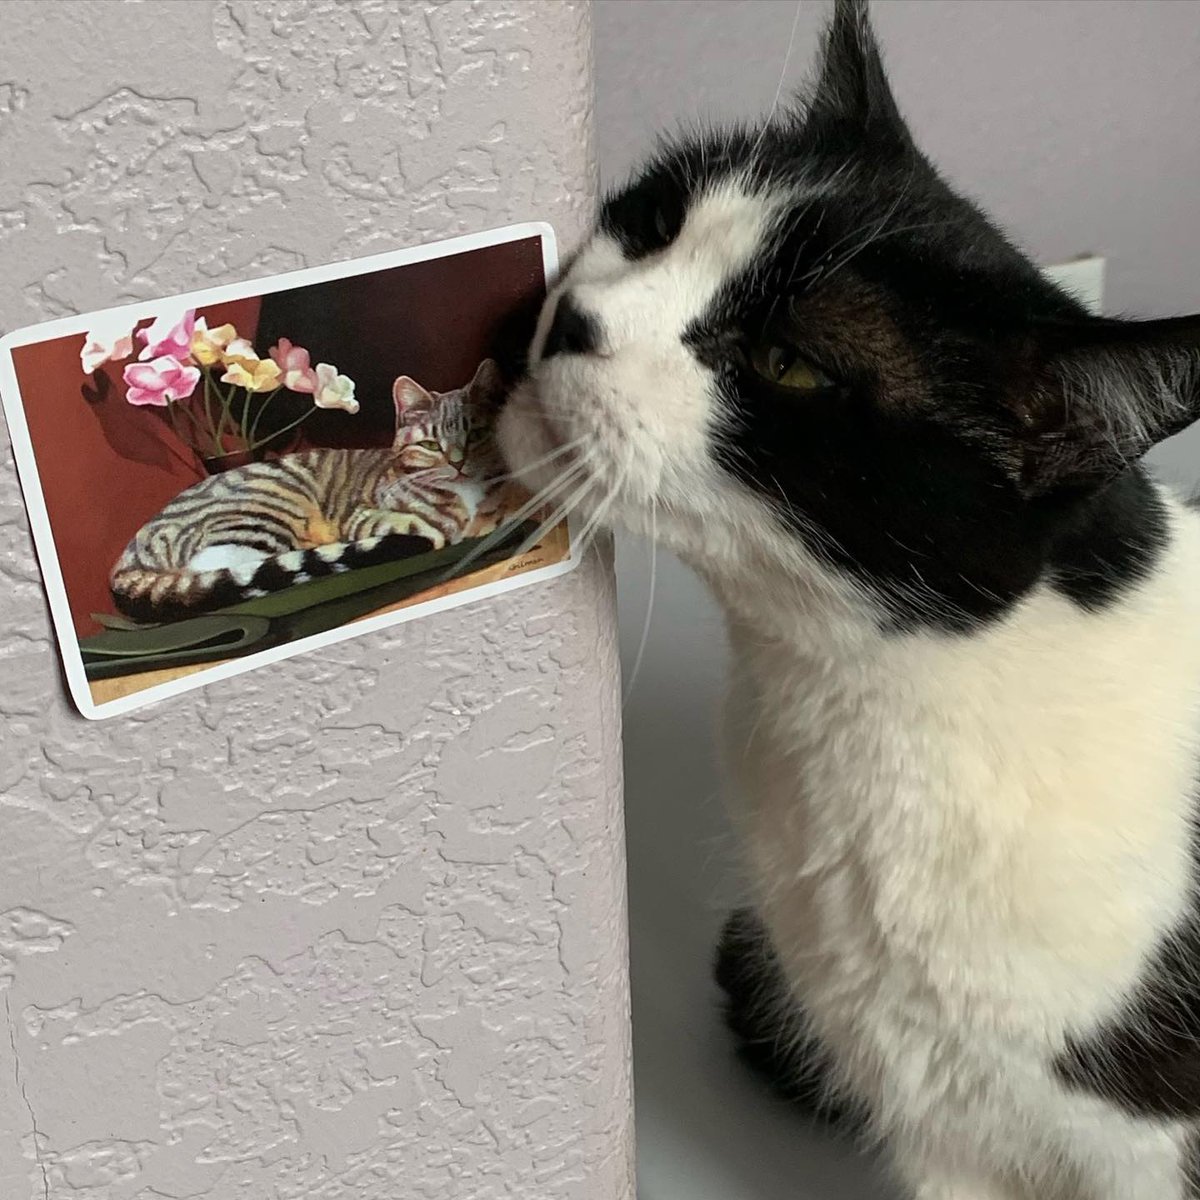 Another happy customer! Ricky thinks my “Mia” vinyl sticker is just purrrfect! All proceeds from “Mia” prints and merchandise benefit thespayedclub thanks for sending randyhoman #miathecat #originalart #oilpainter #catportrait #catstagram #tabbylove #purrfect #adoptdontshop #